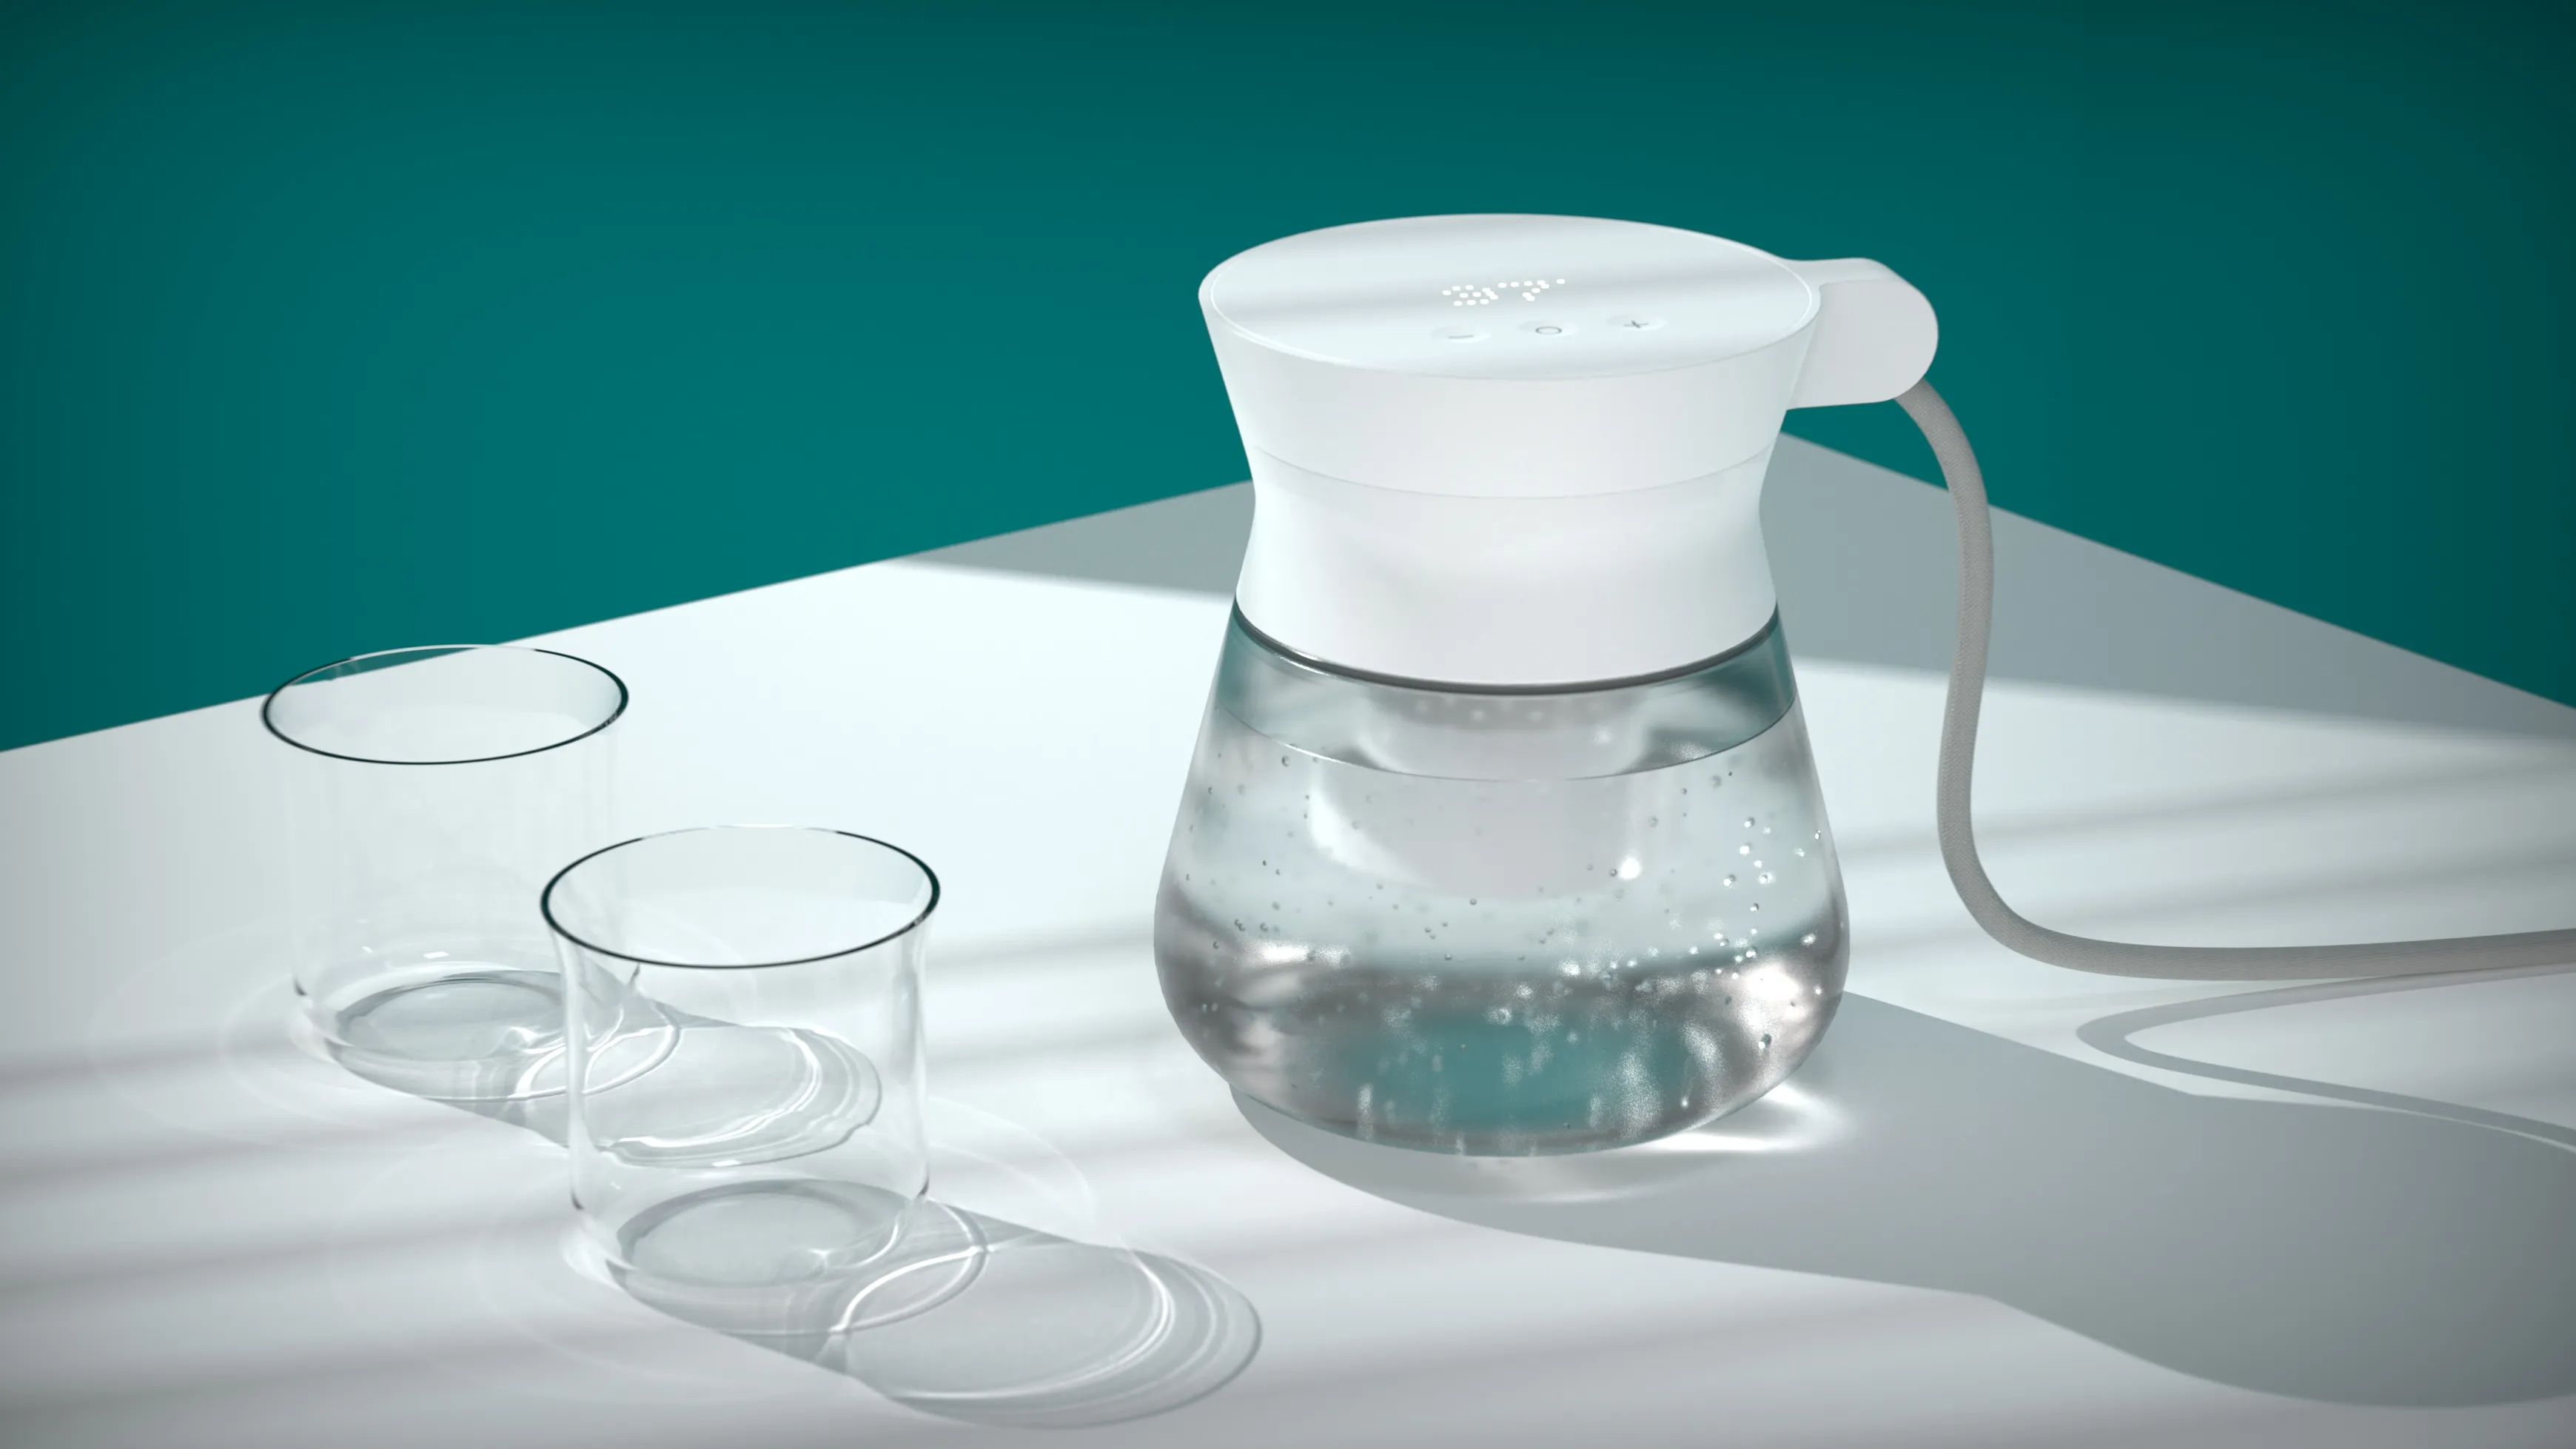 The Intoku smart water kettle with two glasses next to it